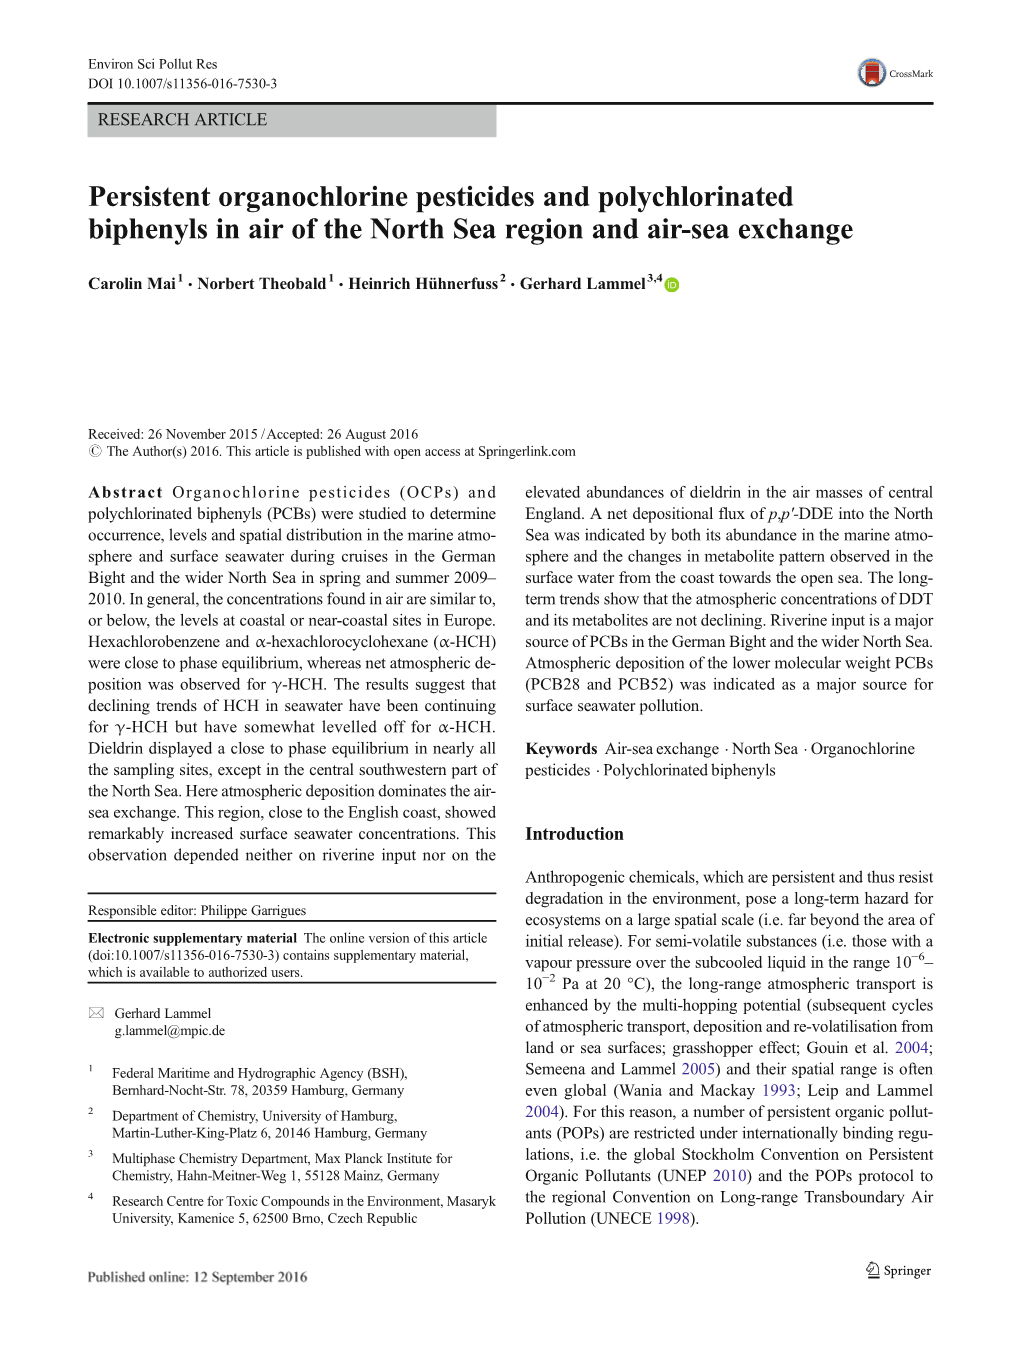 Persistent Organochlorine Pesticides and Polychlorinated Biphenyls in Air of the North Sea Region and Air-Sea Exchange